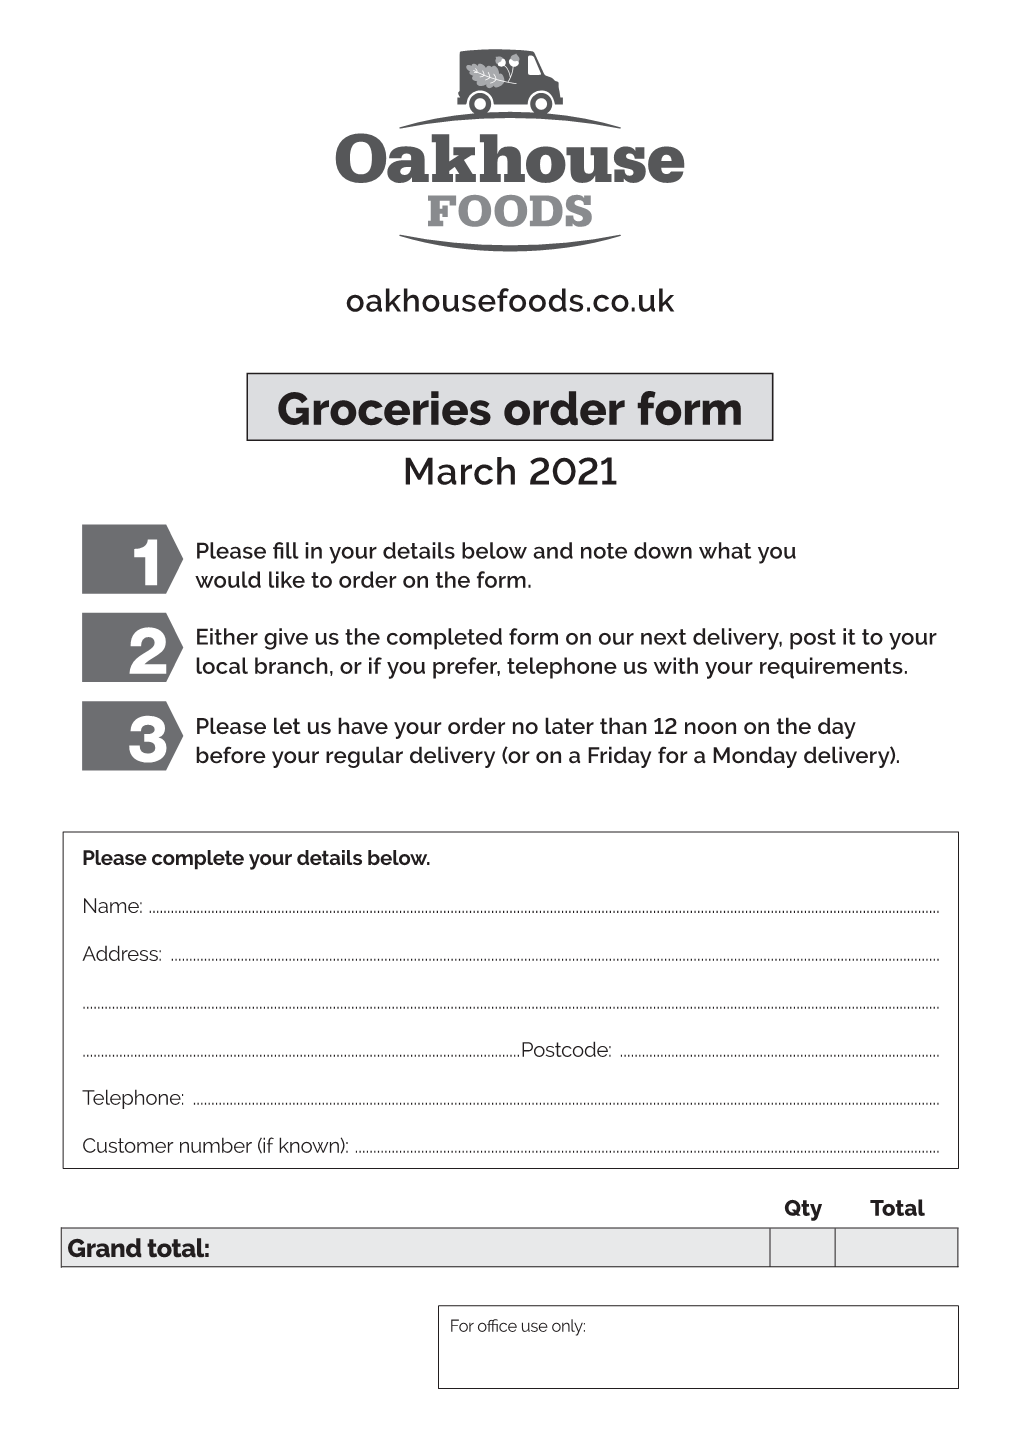 Groceries Order Form March 2021